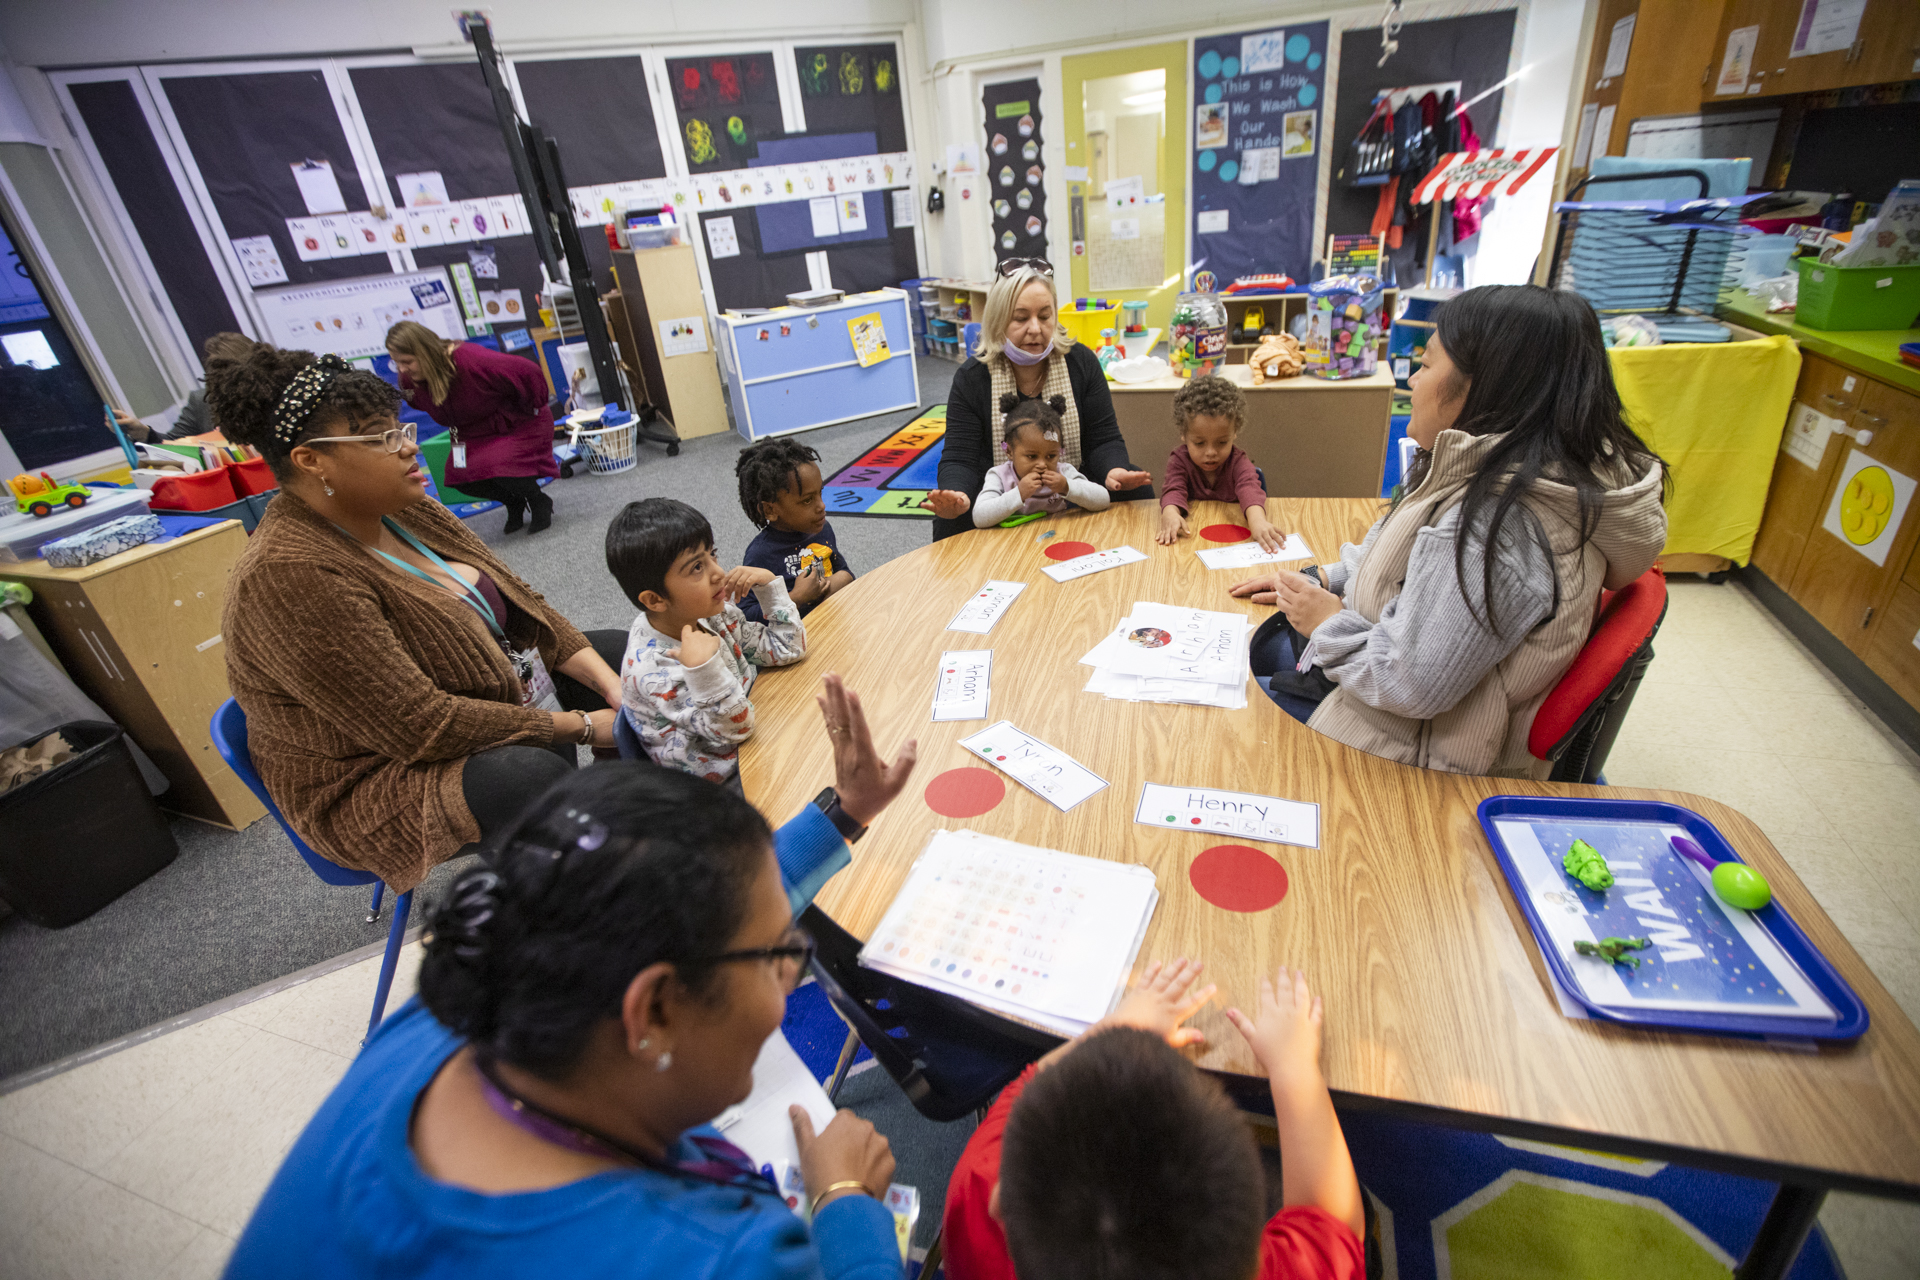 Three women sit at a table with preschool students inside a classroom.